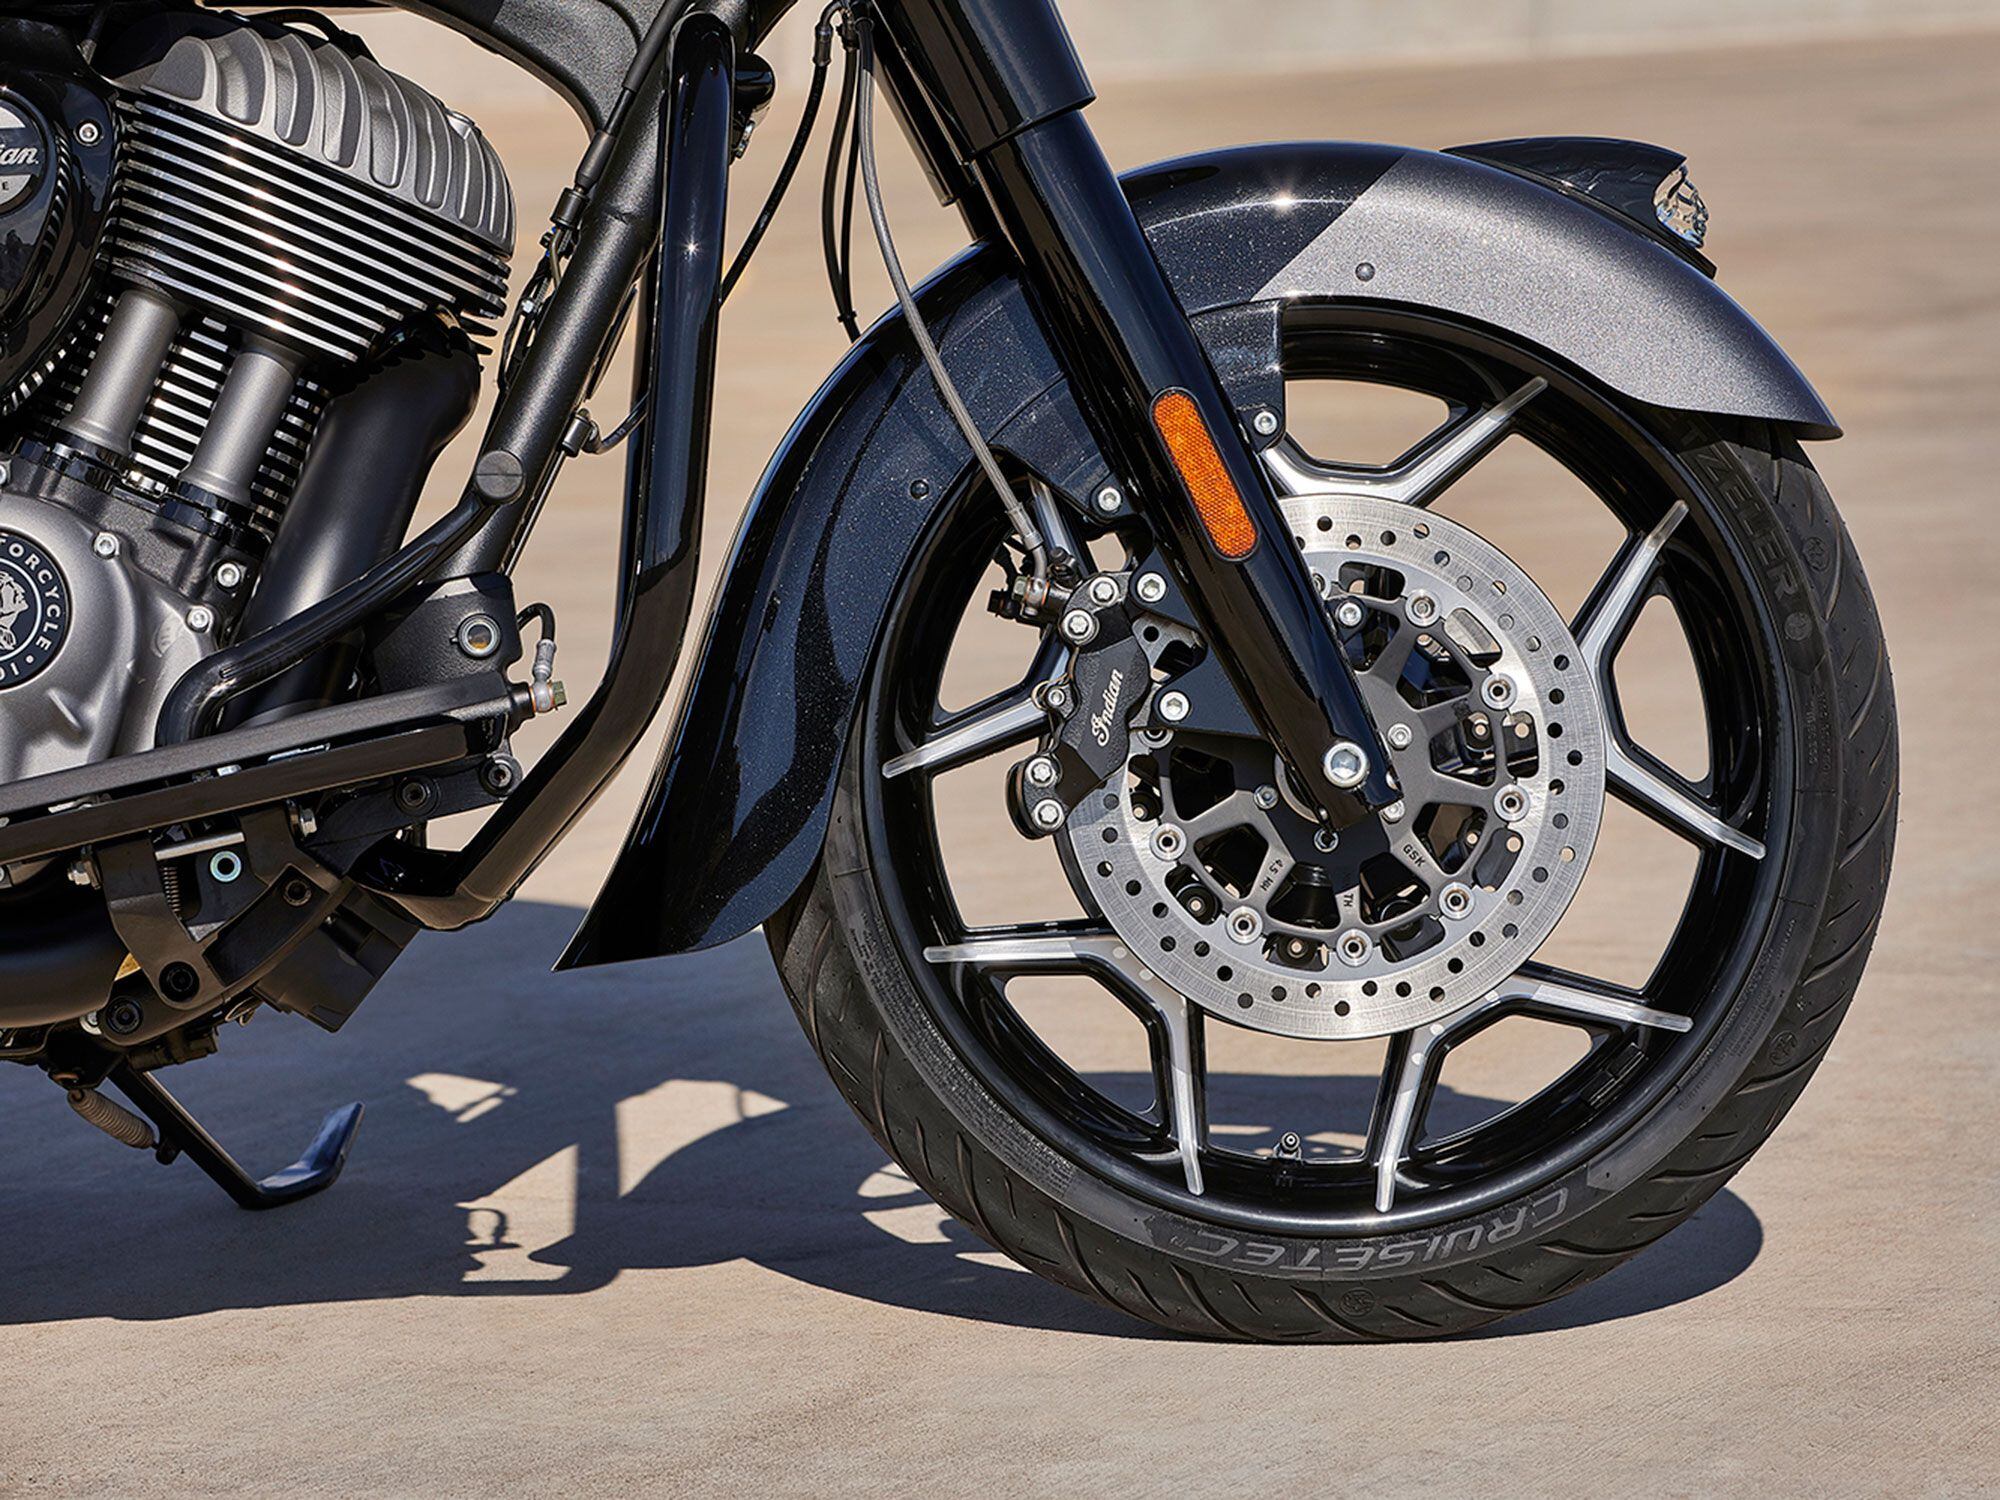 The forged, 19-inch front wheel is wrapped in a Metzeler Cruisetec tire and hugged by Indian’s iconic fender shape.